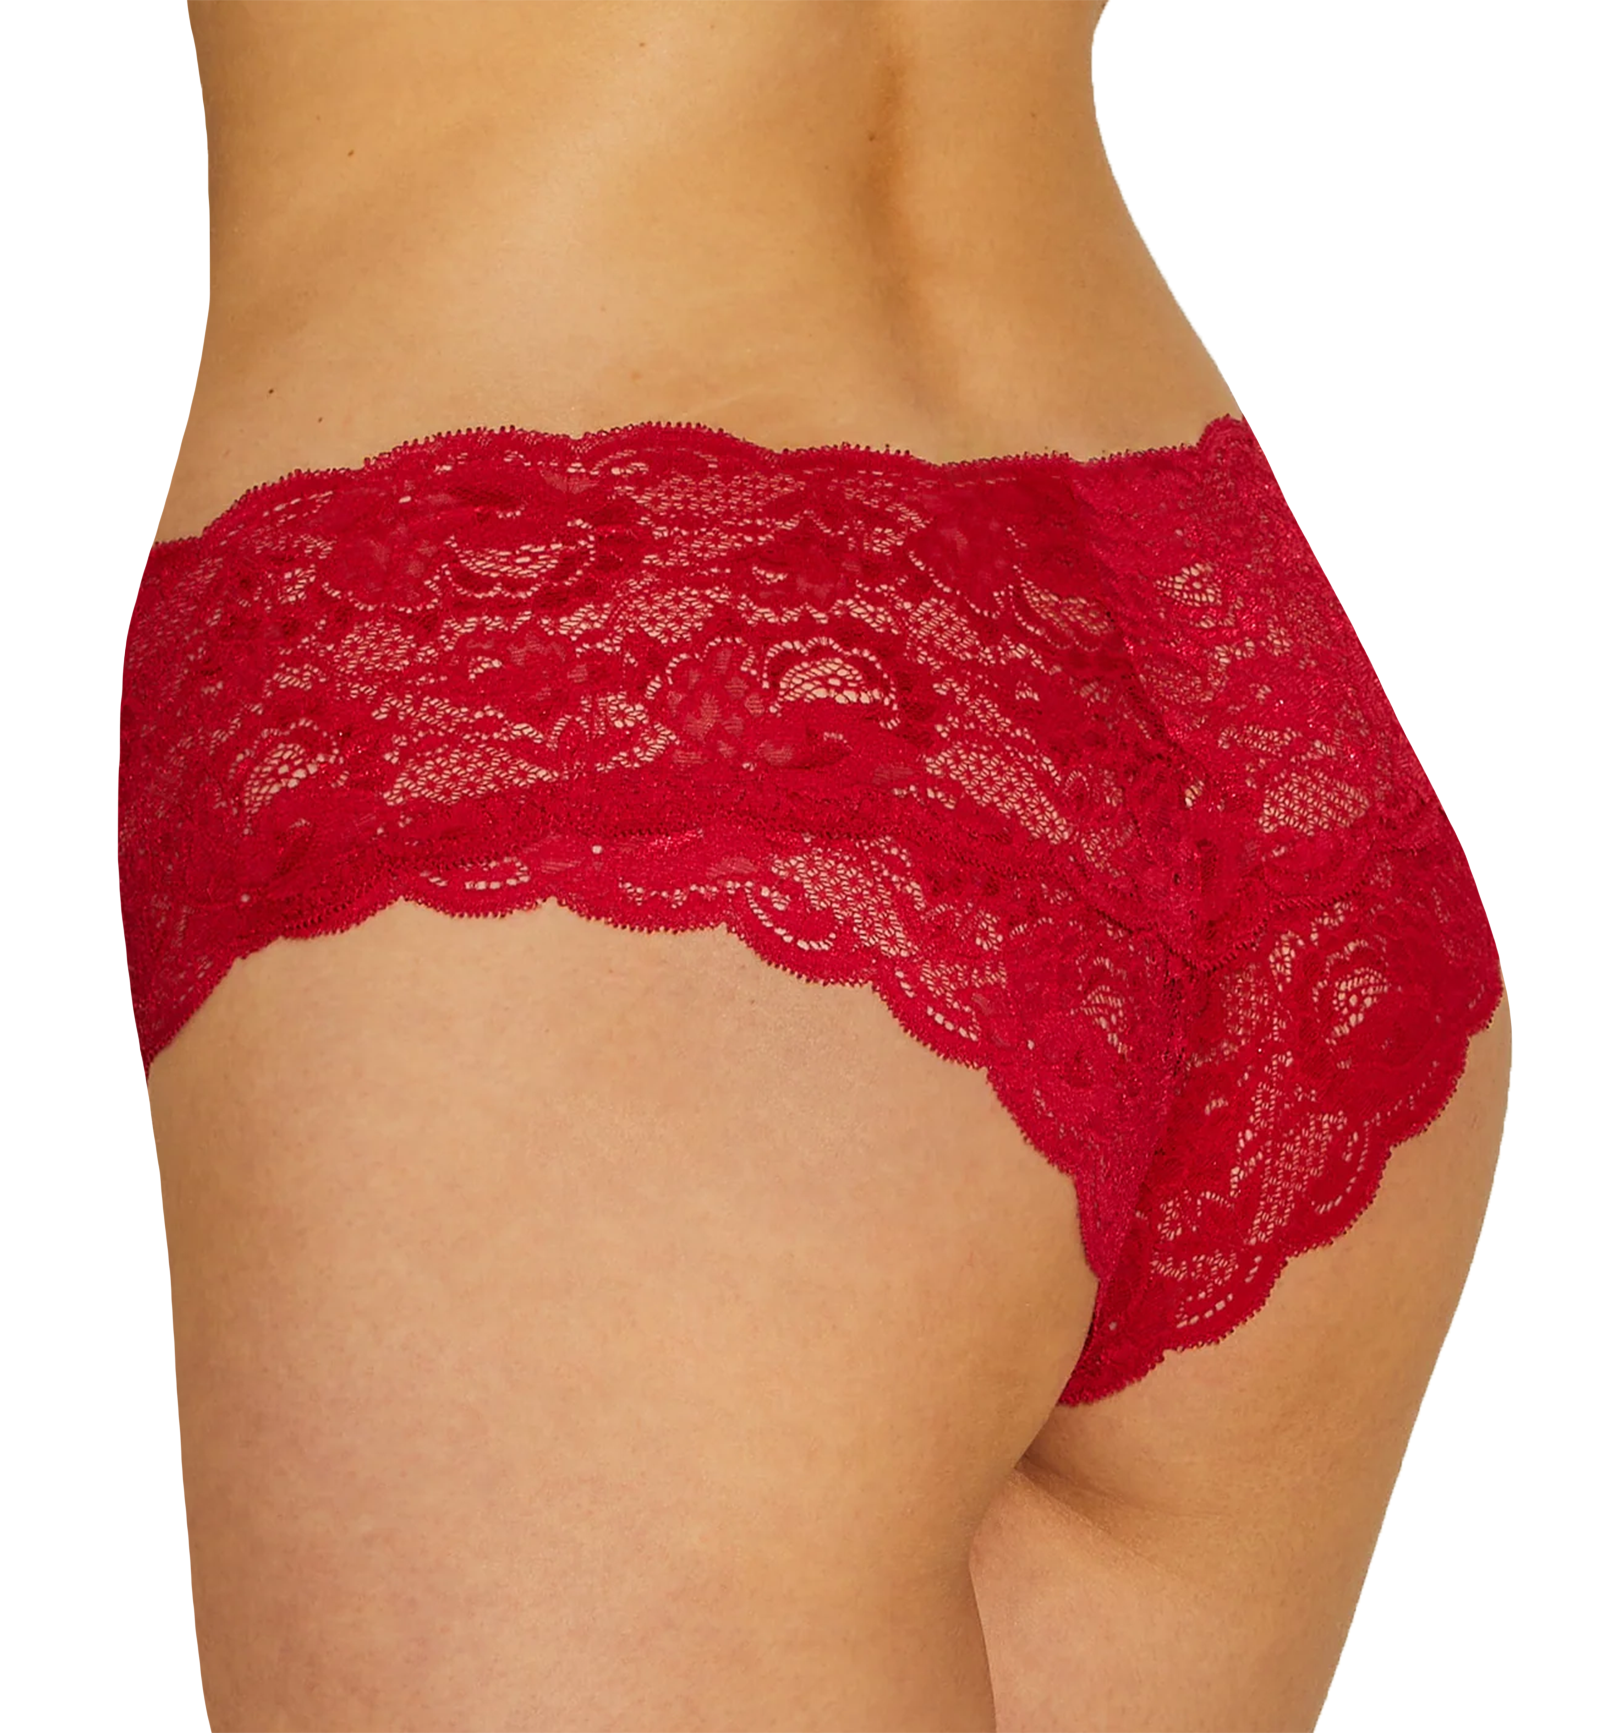 Cosabella Never Say Never Hottie Lowrider Hotpant (NEVER07ZL),S/M,Mystic Red - Mystic Red,S/M